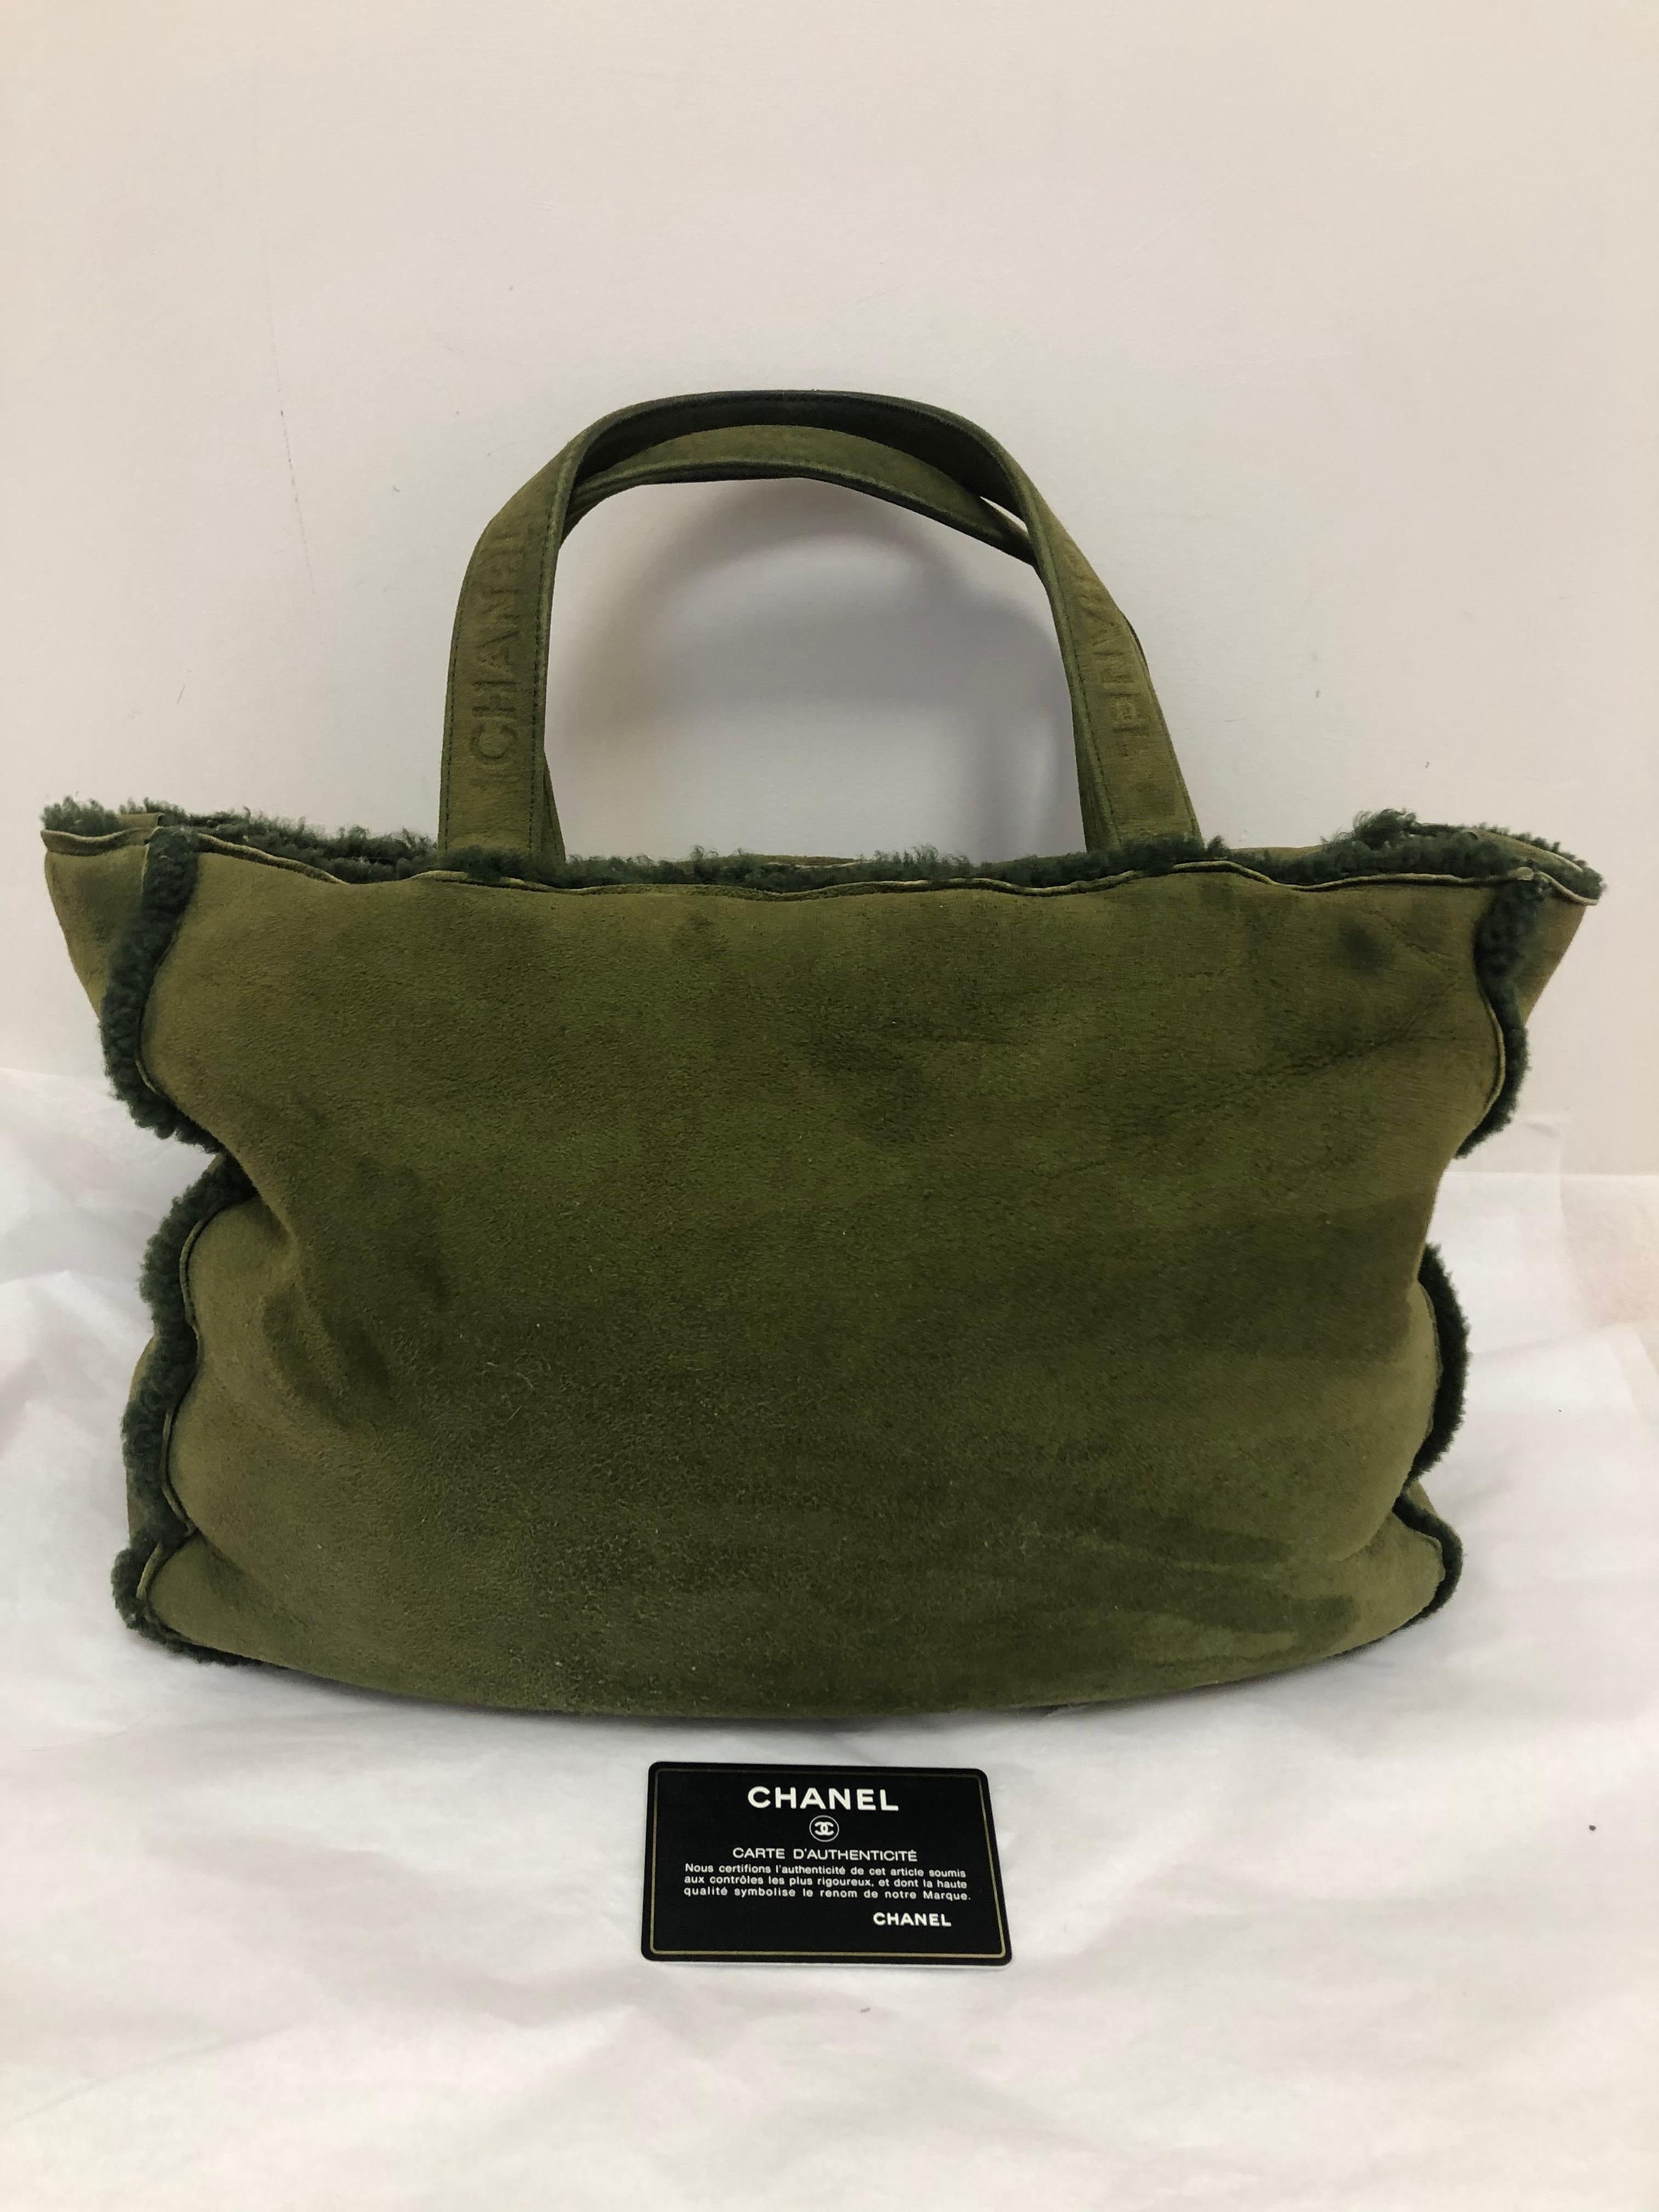 1996/97 Chanel Large Green Mouton/Suede Handbag w/COA and Card 8